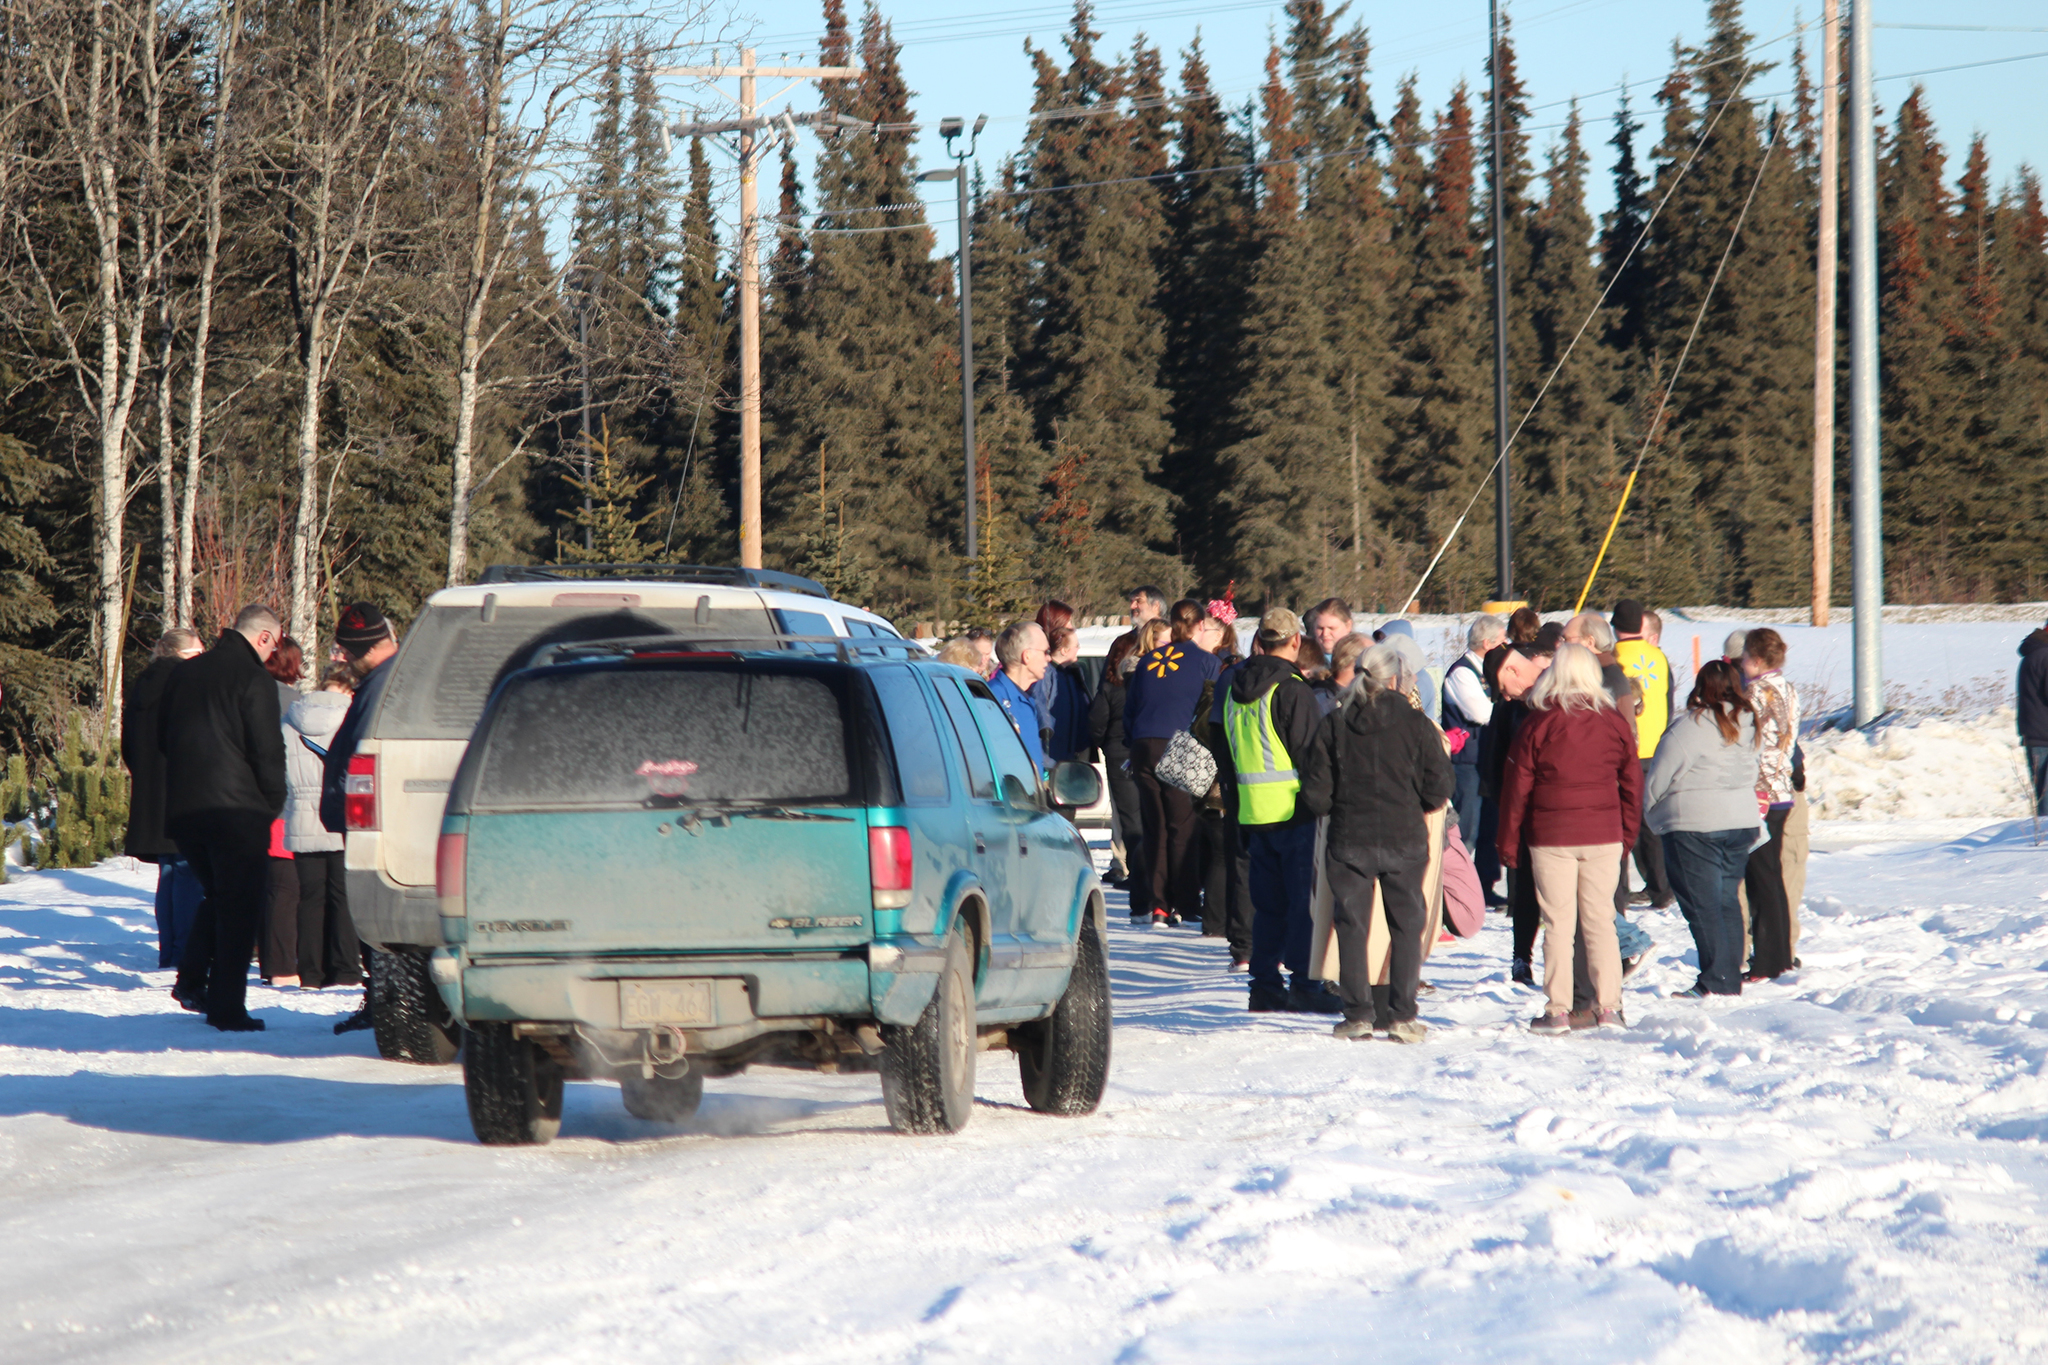 Customers and employees stand in the parking lot of the former Lowe’s building after being evacuated from the Kenai Walmart on Thursday, Feb. 2, 2017 in Kenai, Alaska. Local law enforcement officers responded to a bomb threat called in to the store around 12:30 p.m. and evacuated the building during their search. They found no explosive devices. (Megan Pacer/Peninsula Clarion)